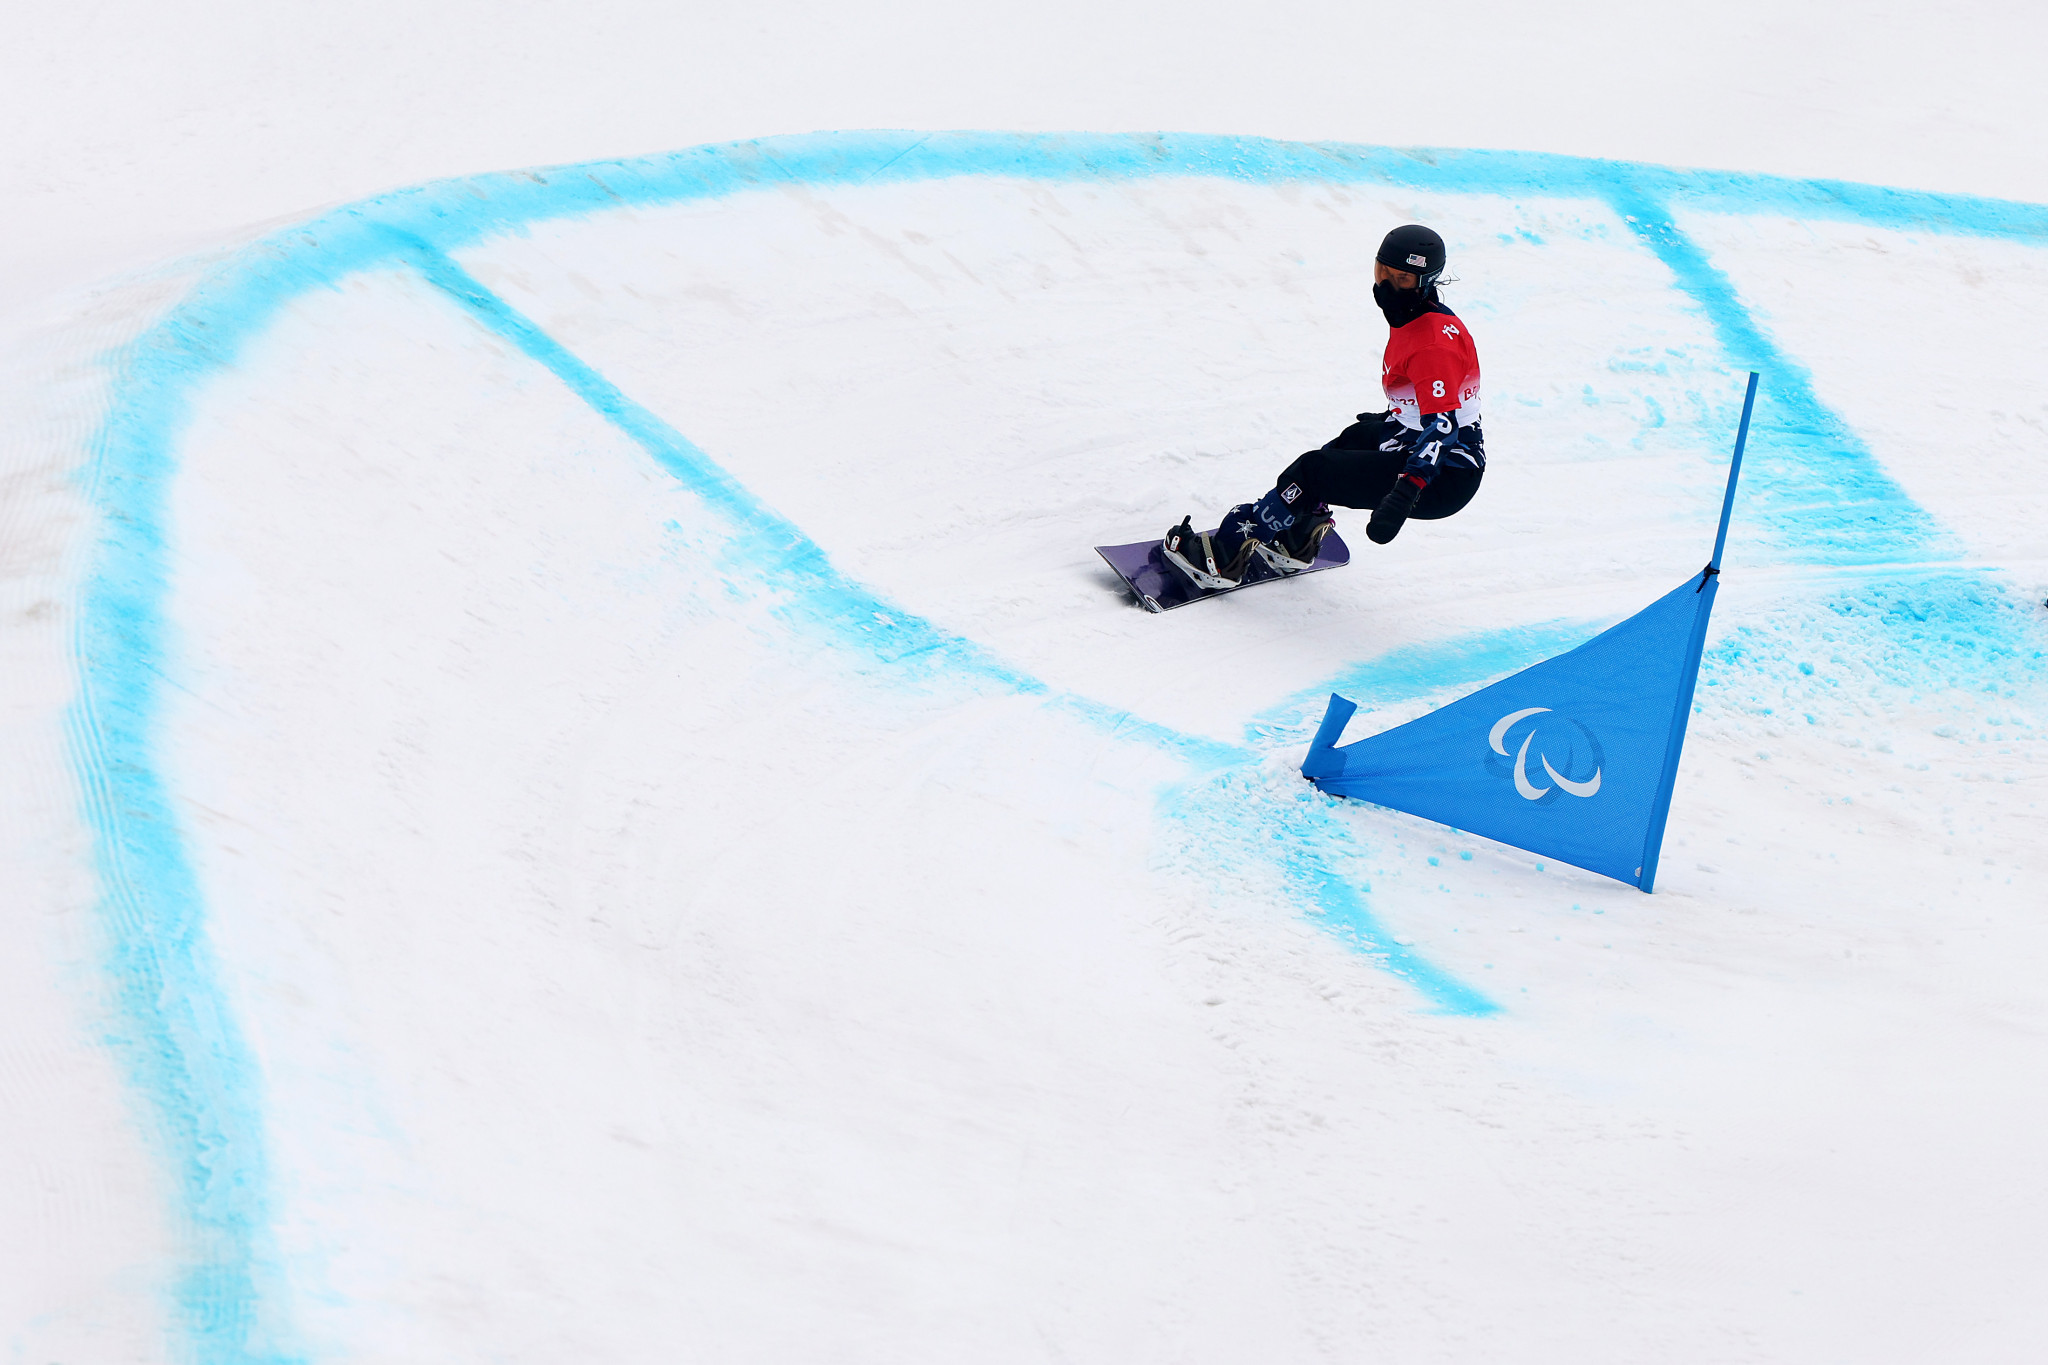 The United States' Brenna Huckaby delivered a stunning second run to move into the women's banked slalom SB-LL2 gold medal position ©Getty Images